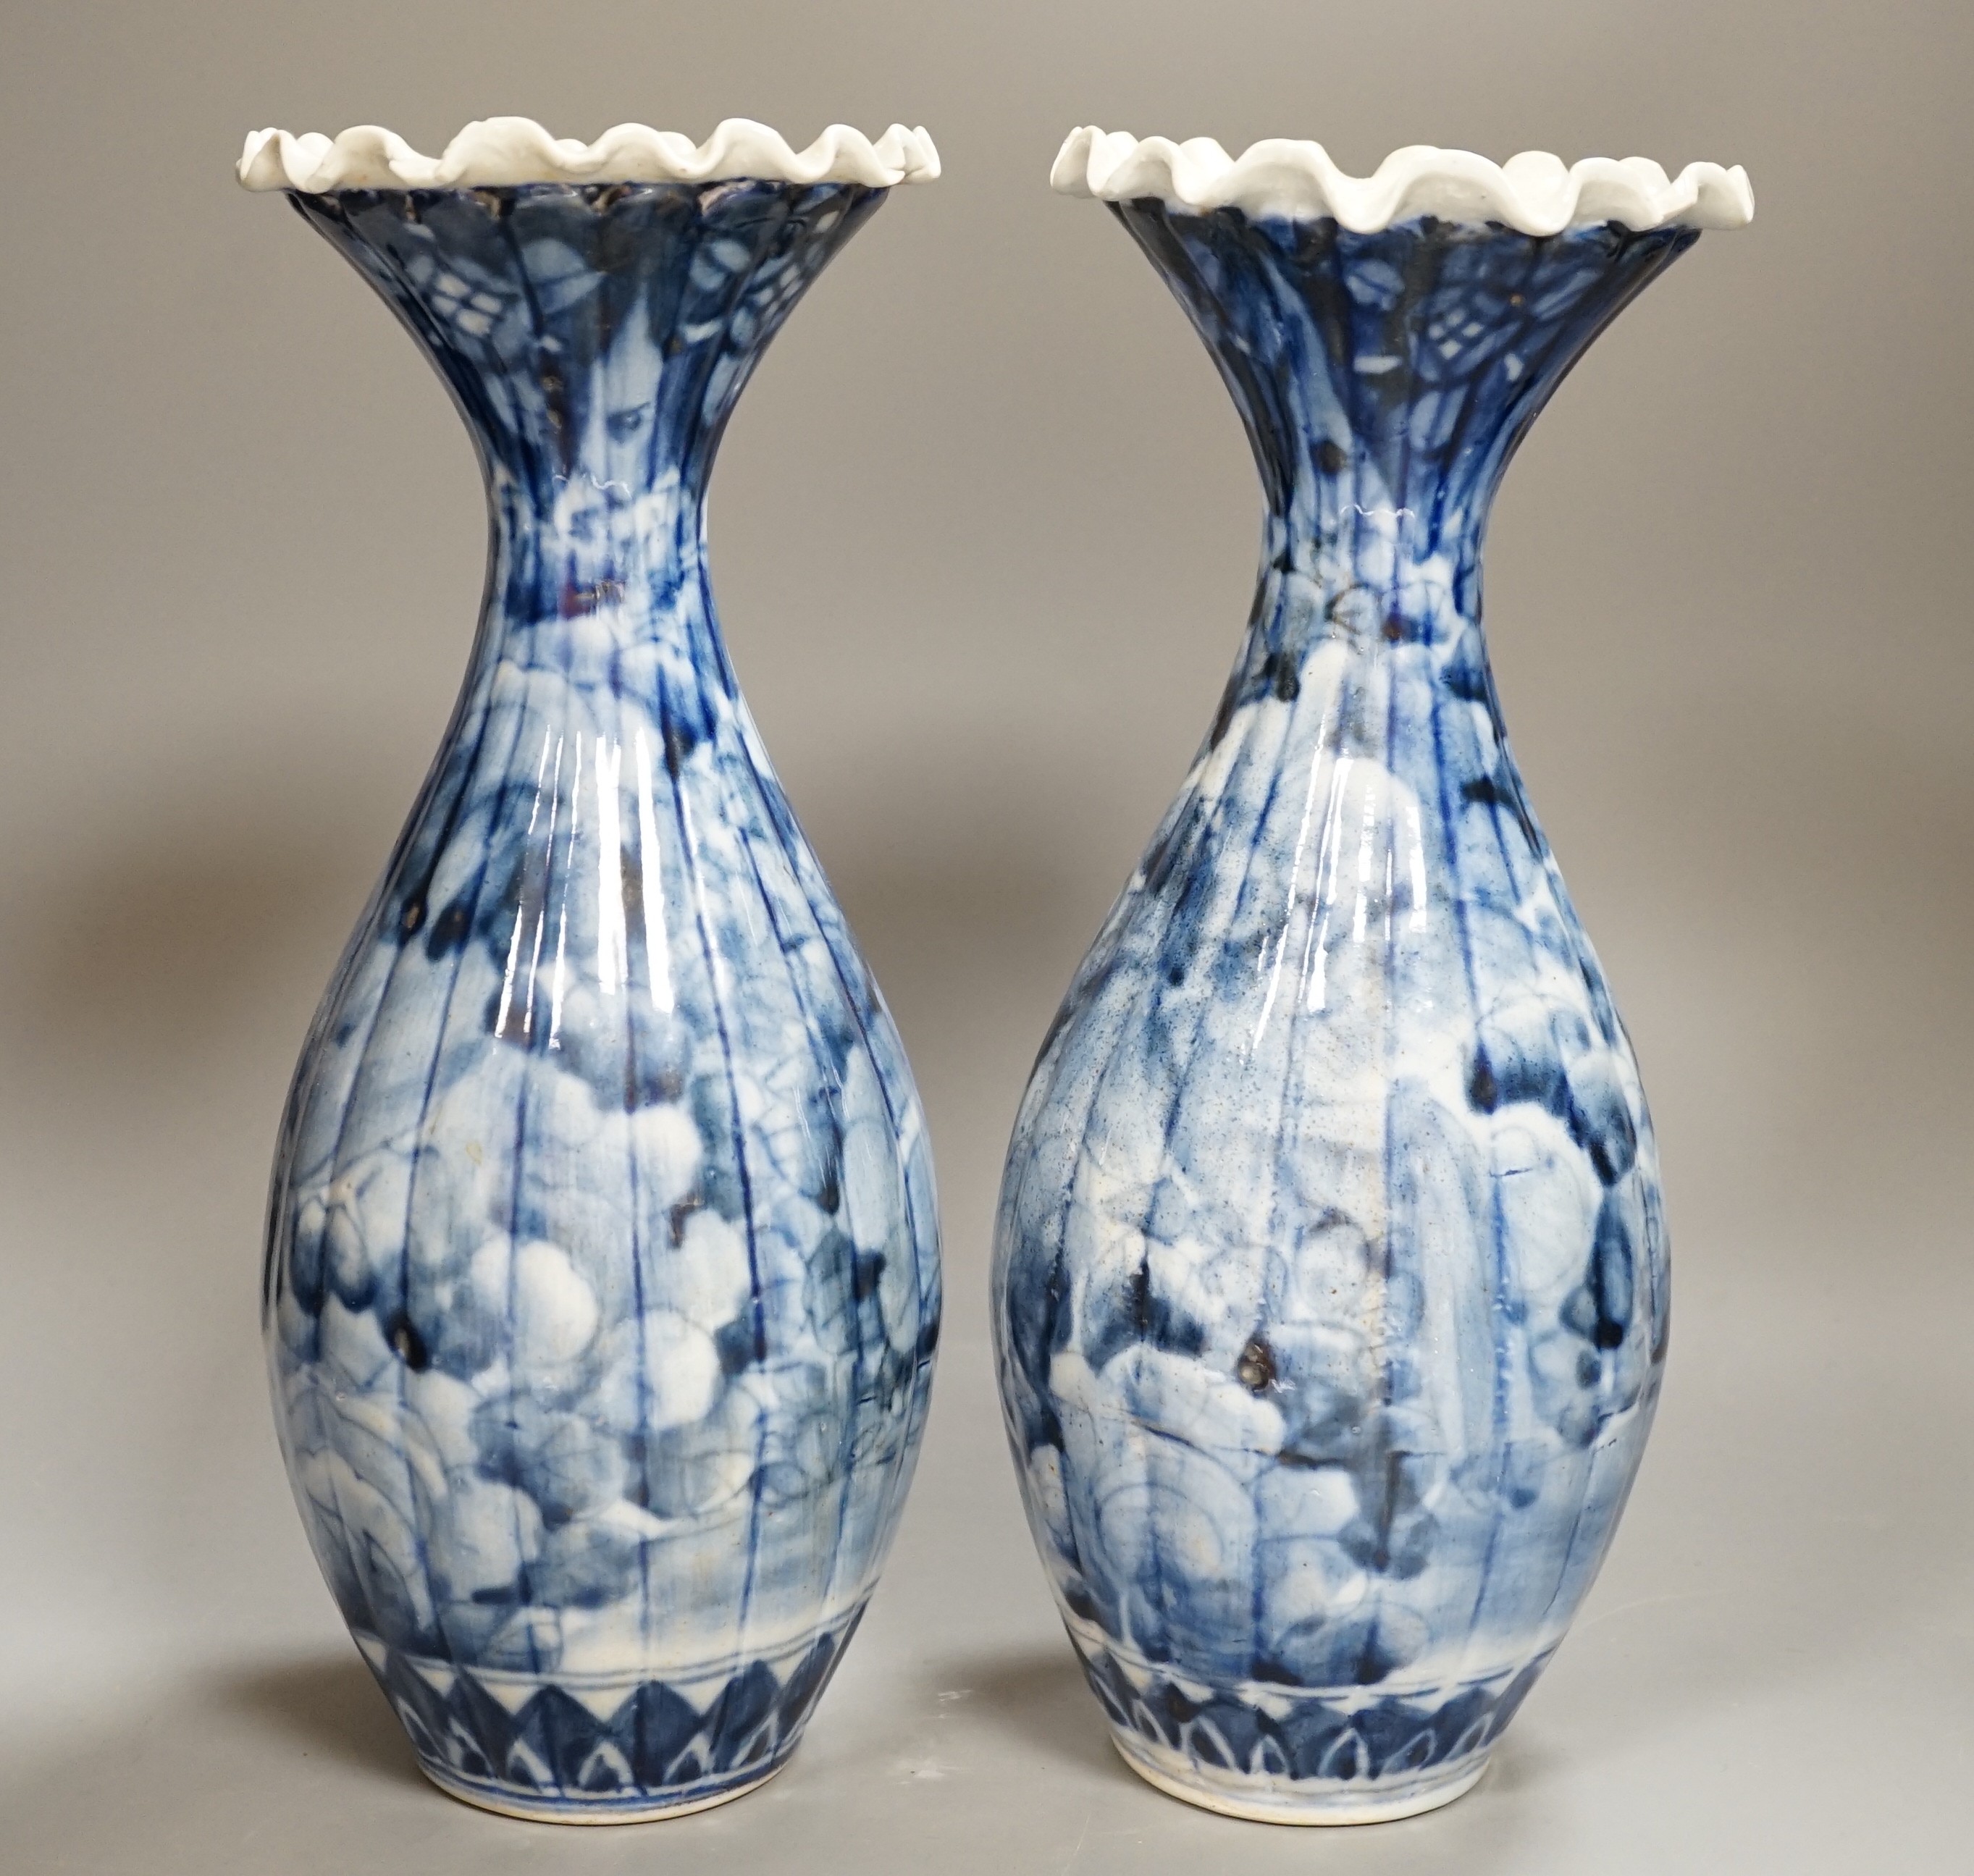 A pair of early 20th century Japanese fluted blue and white flared rim vases, 31.5cm - Image 2 of 6